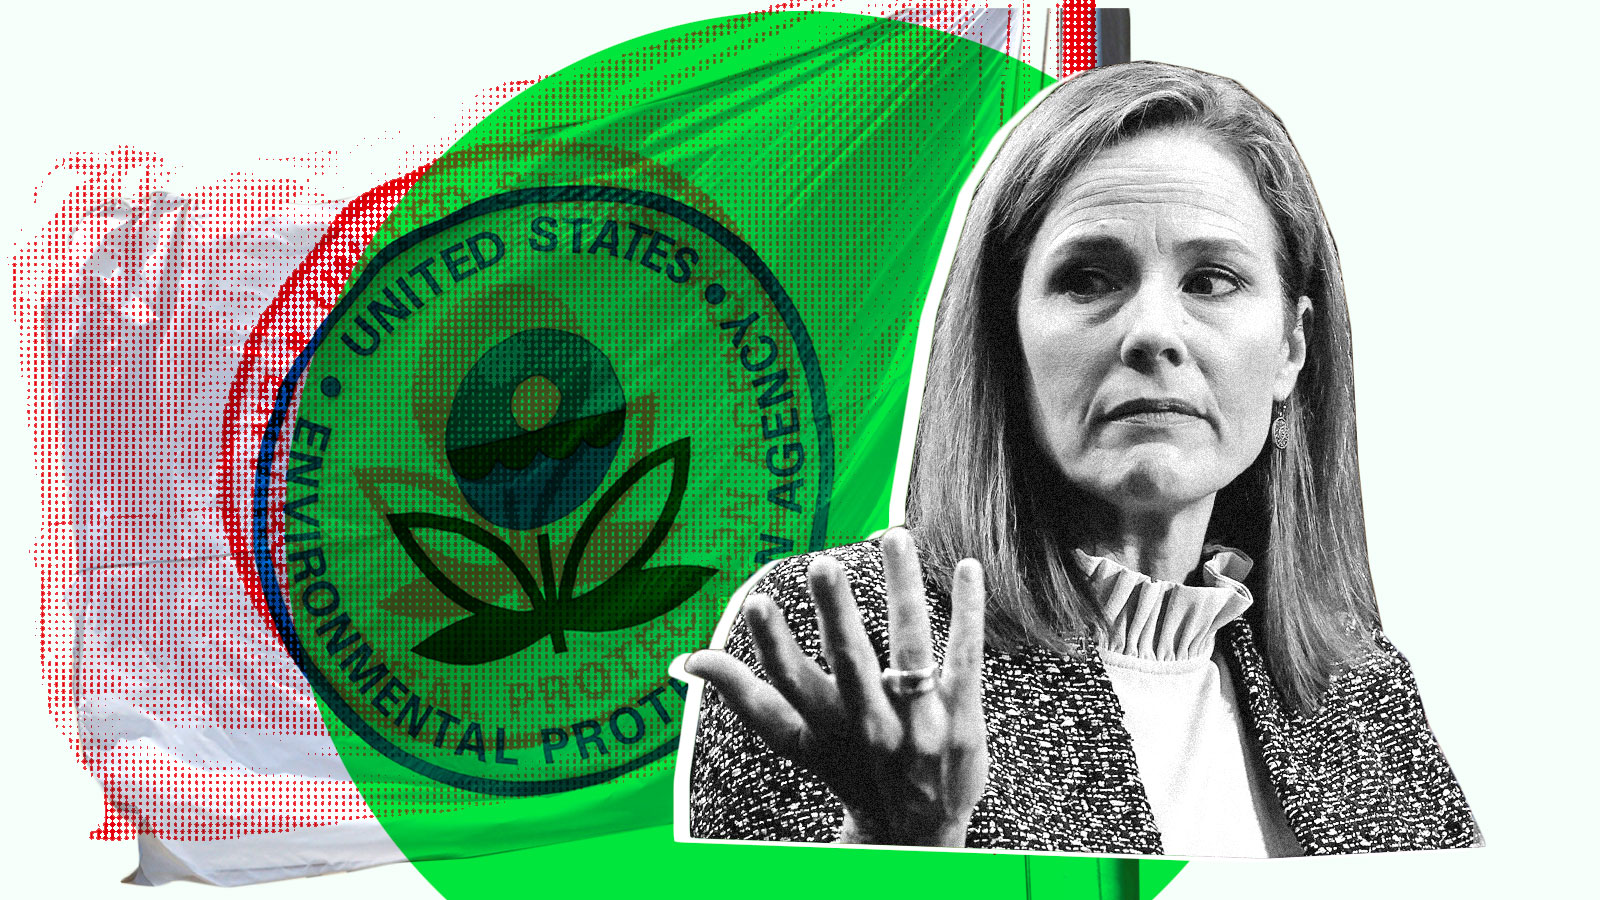 Amy Coney Barrett sits over an image of the flag of the Environmental Protection Agency